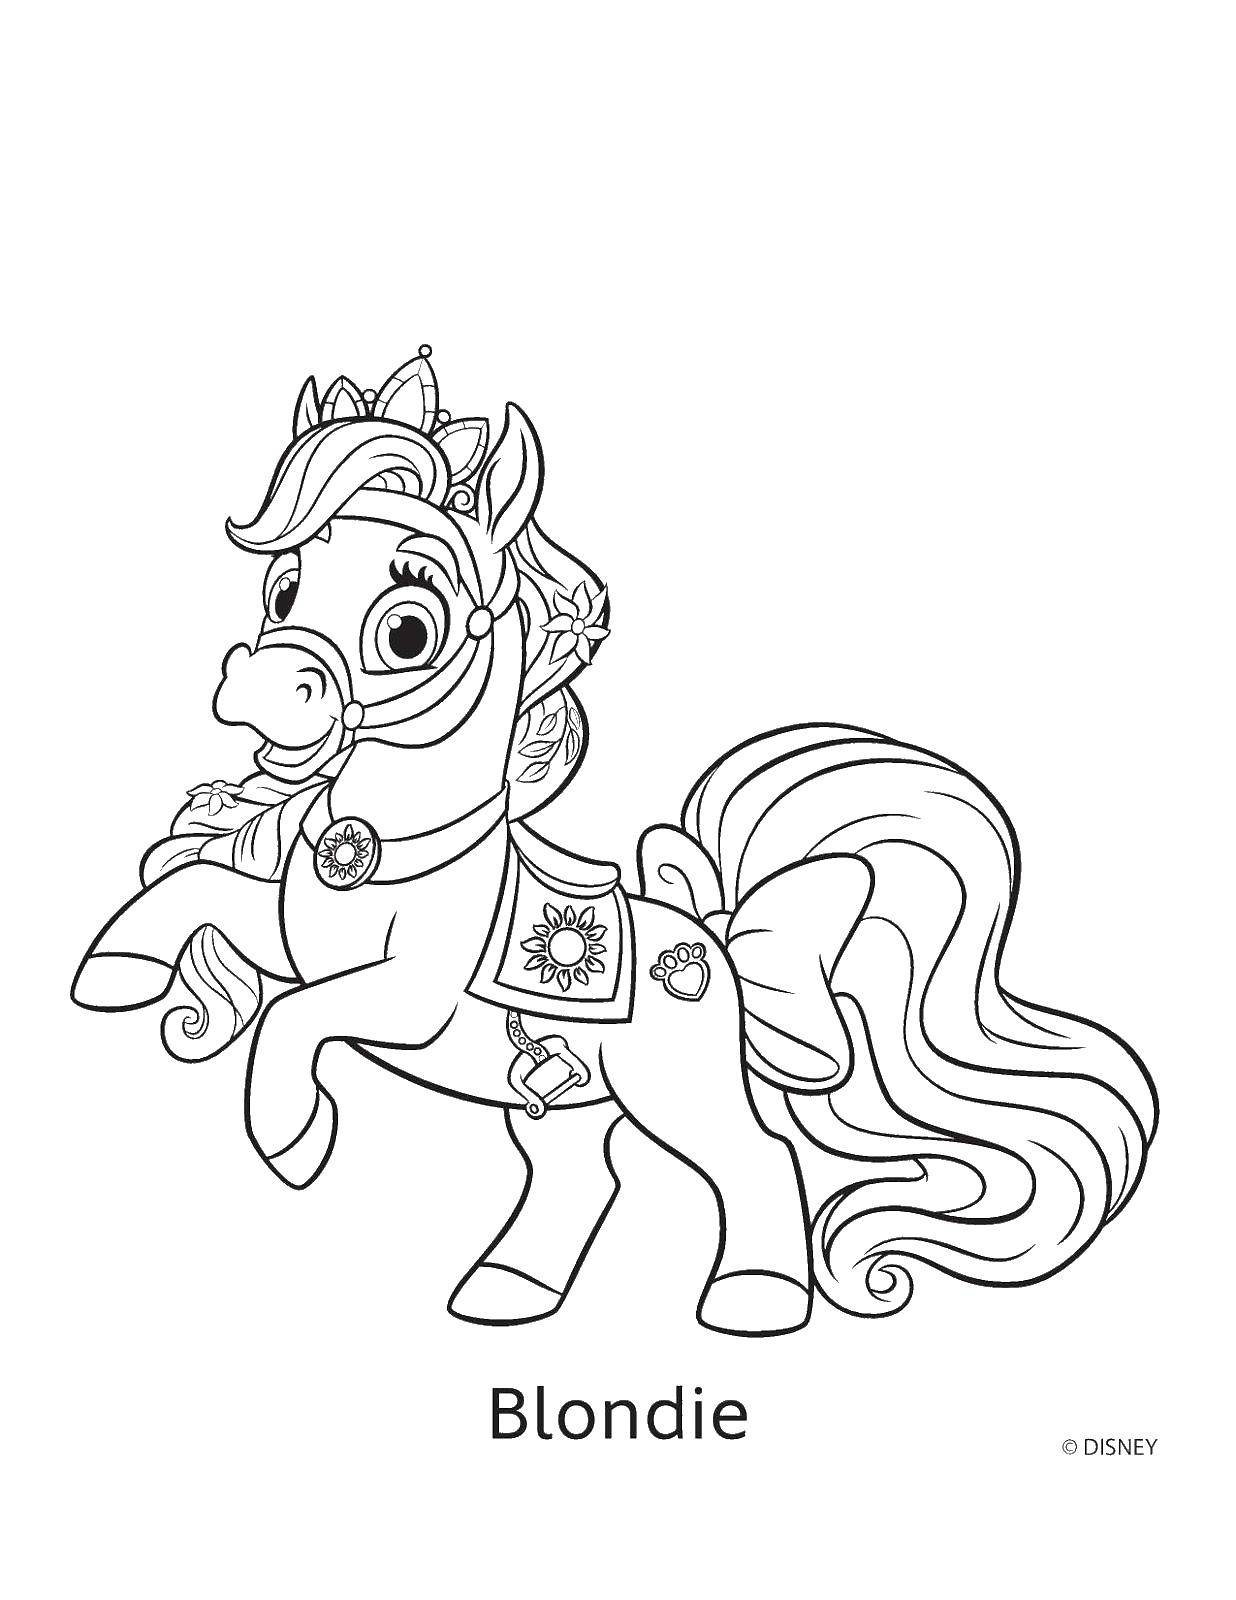 Coloring Pony Blondie. Category my little pony. Tags:  pony, Blondie, mane.